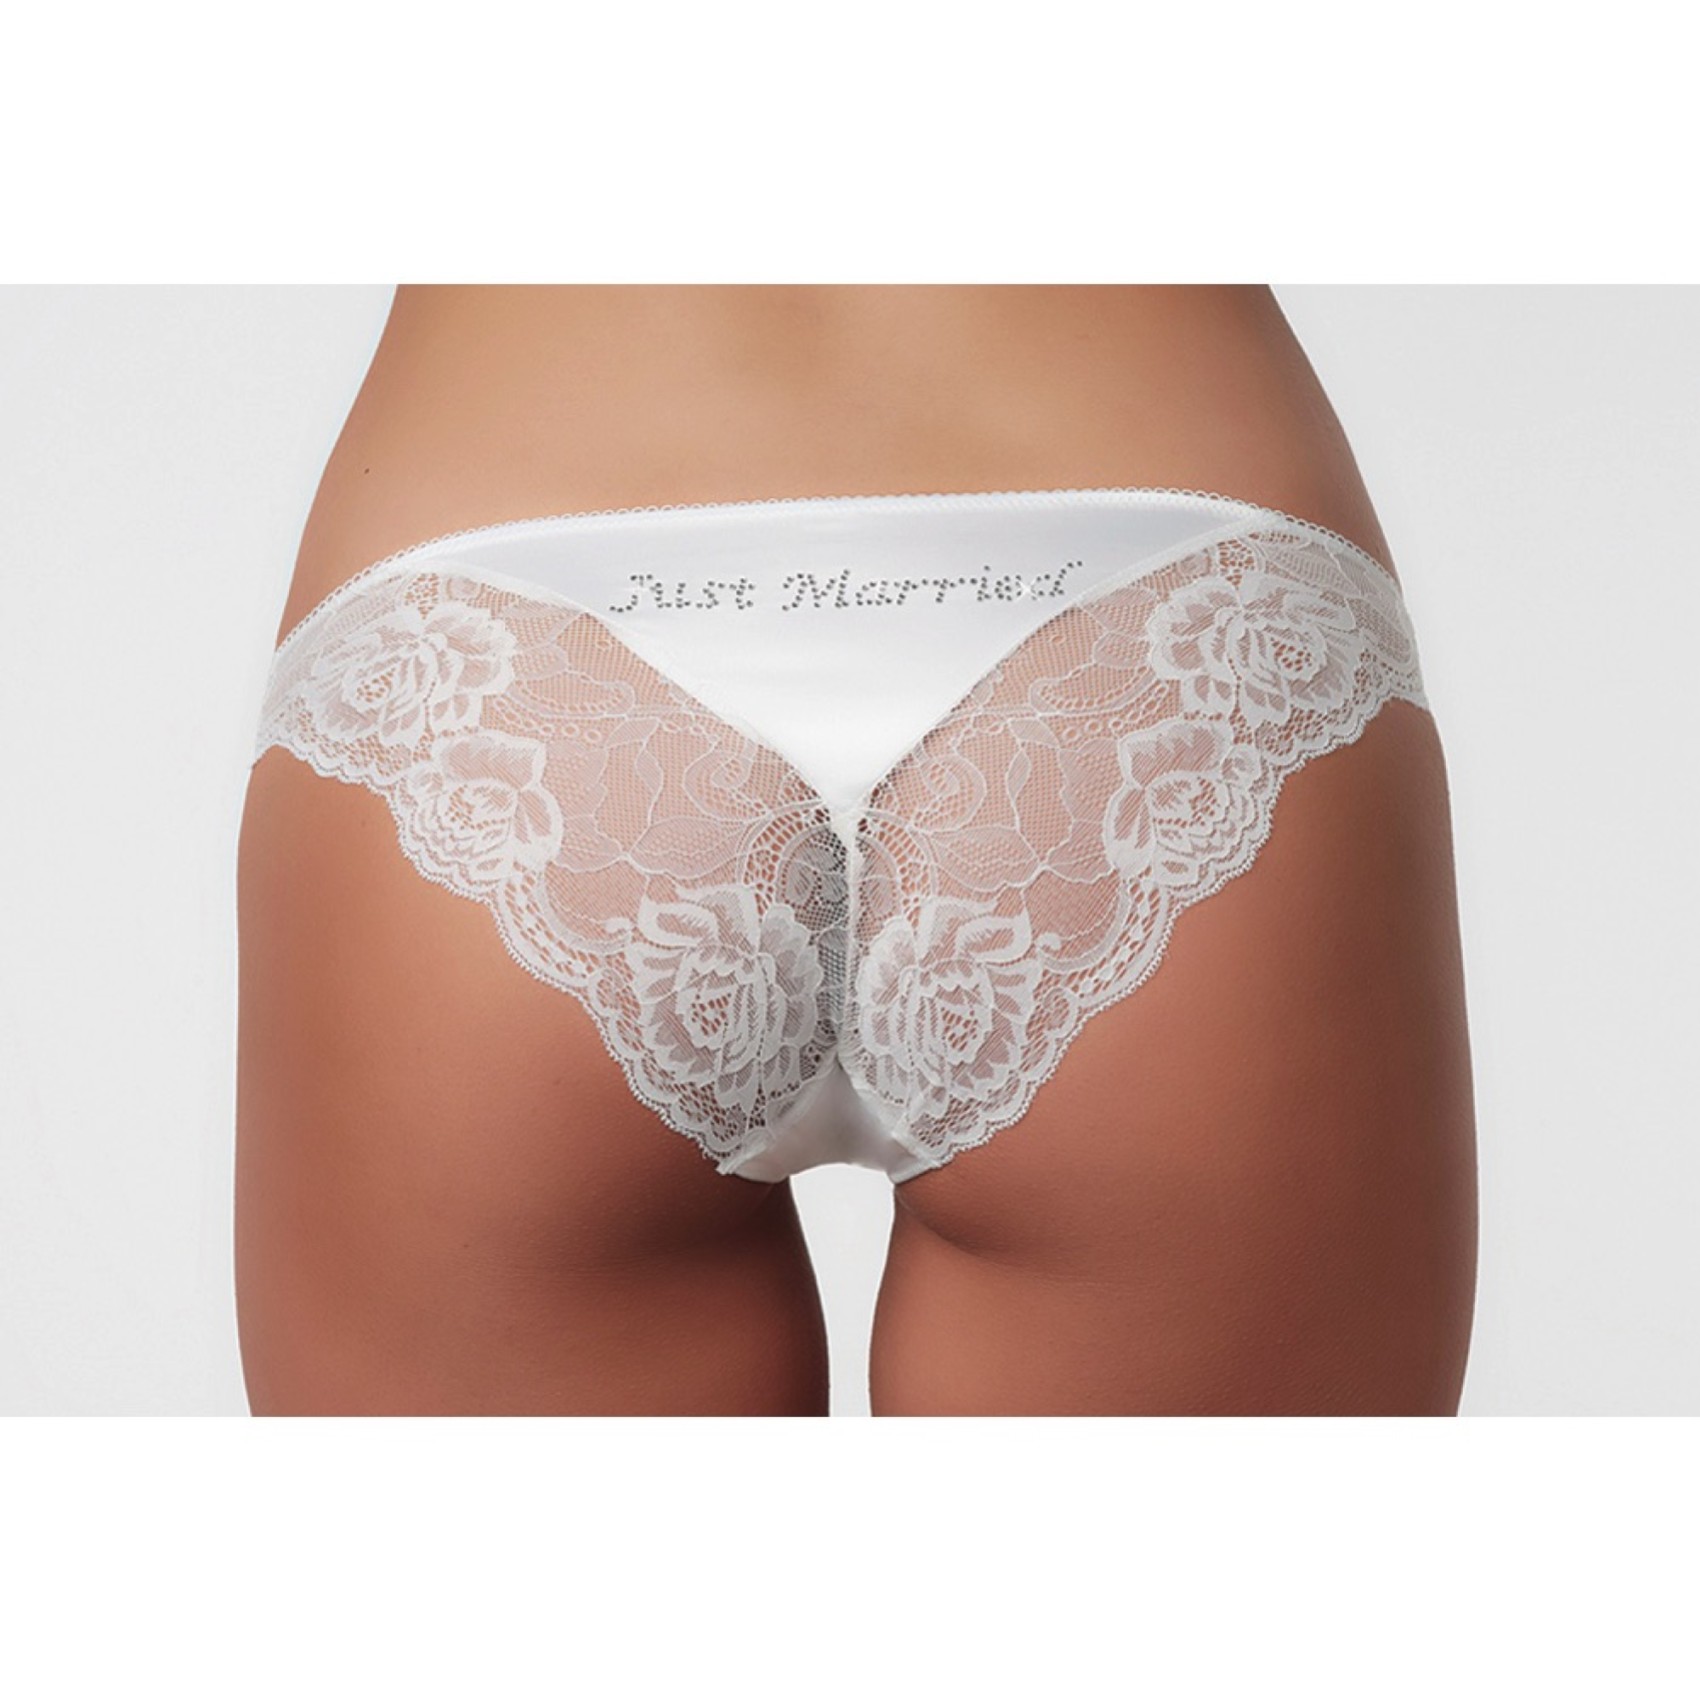 Personalised glitter Mrs (your name) bridal underwear - diamante